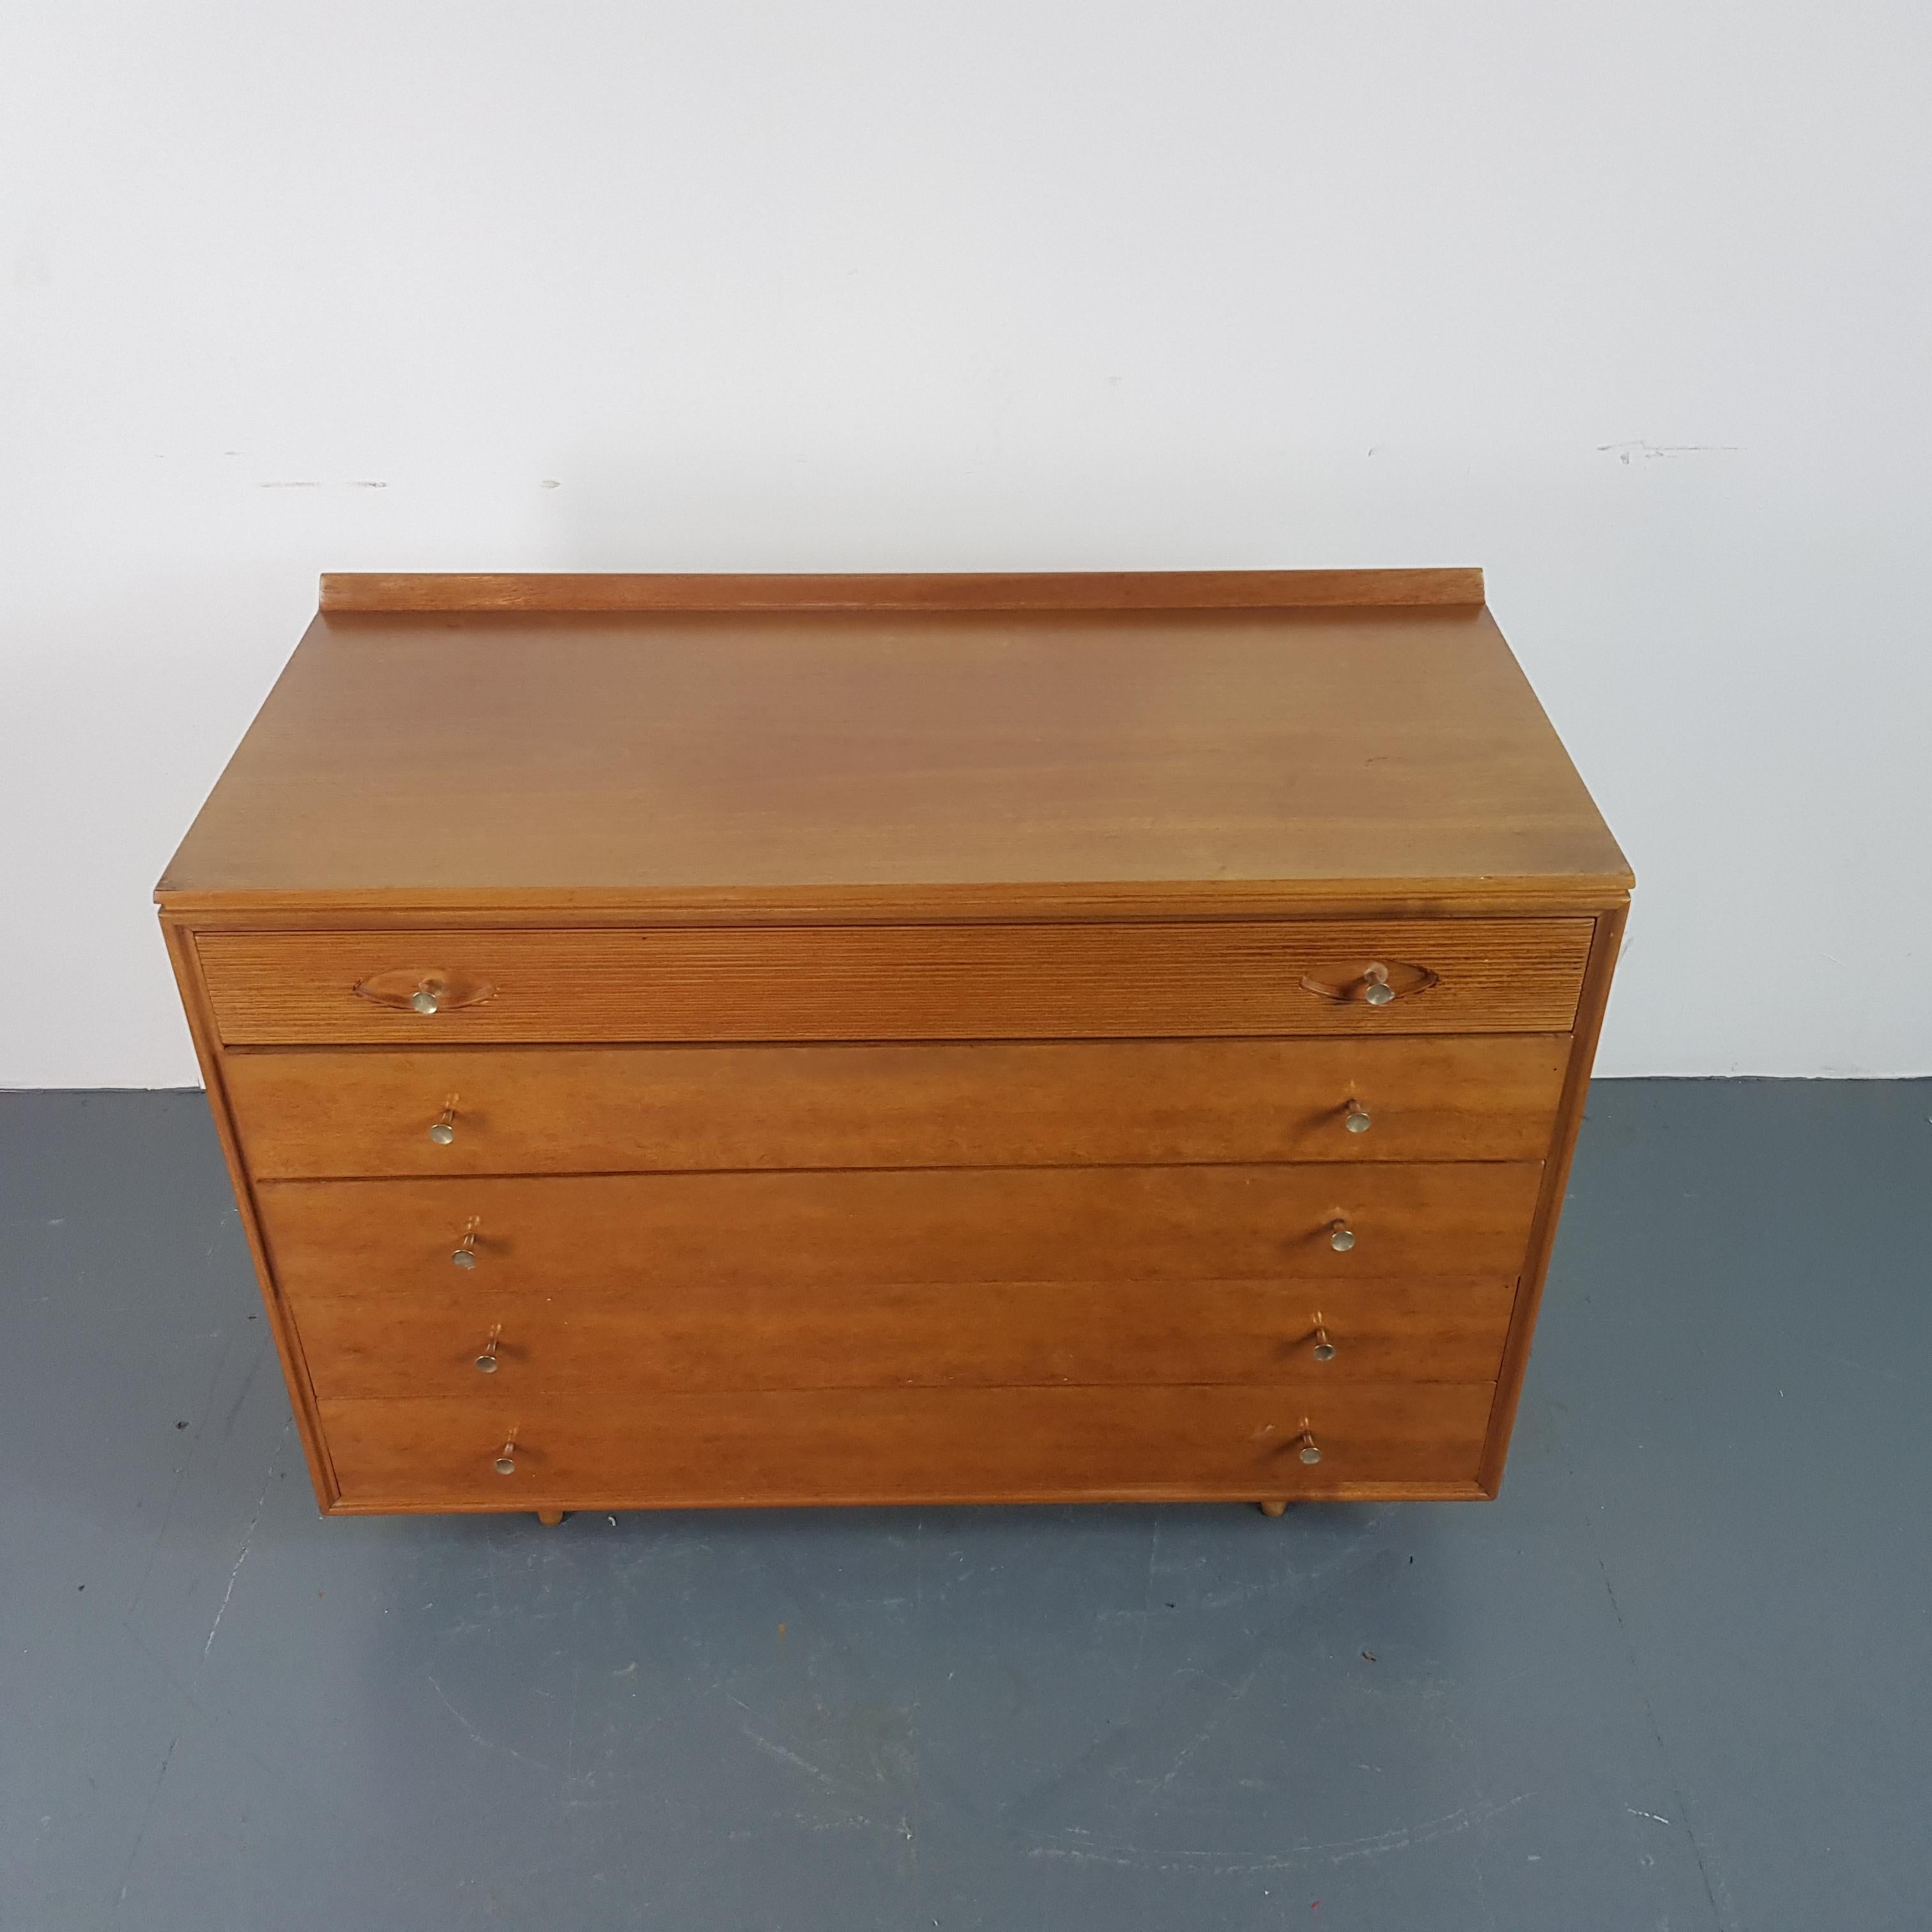 Vintage Midcentury Teak Chest of Drawers by Robert Heritage for Archie Shine In Good Condition For Sale In Lewes, East Sussex